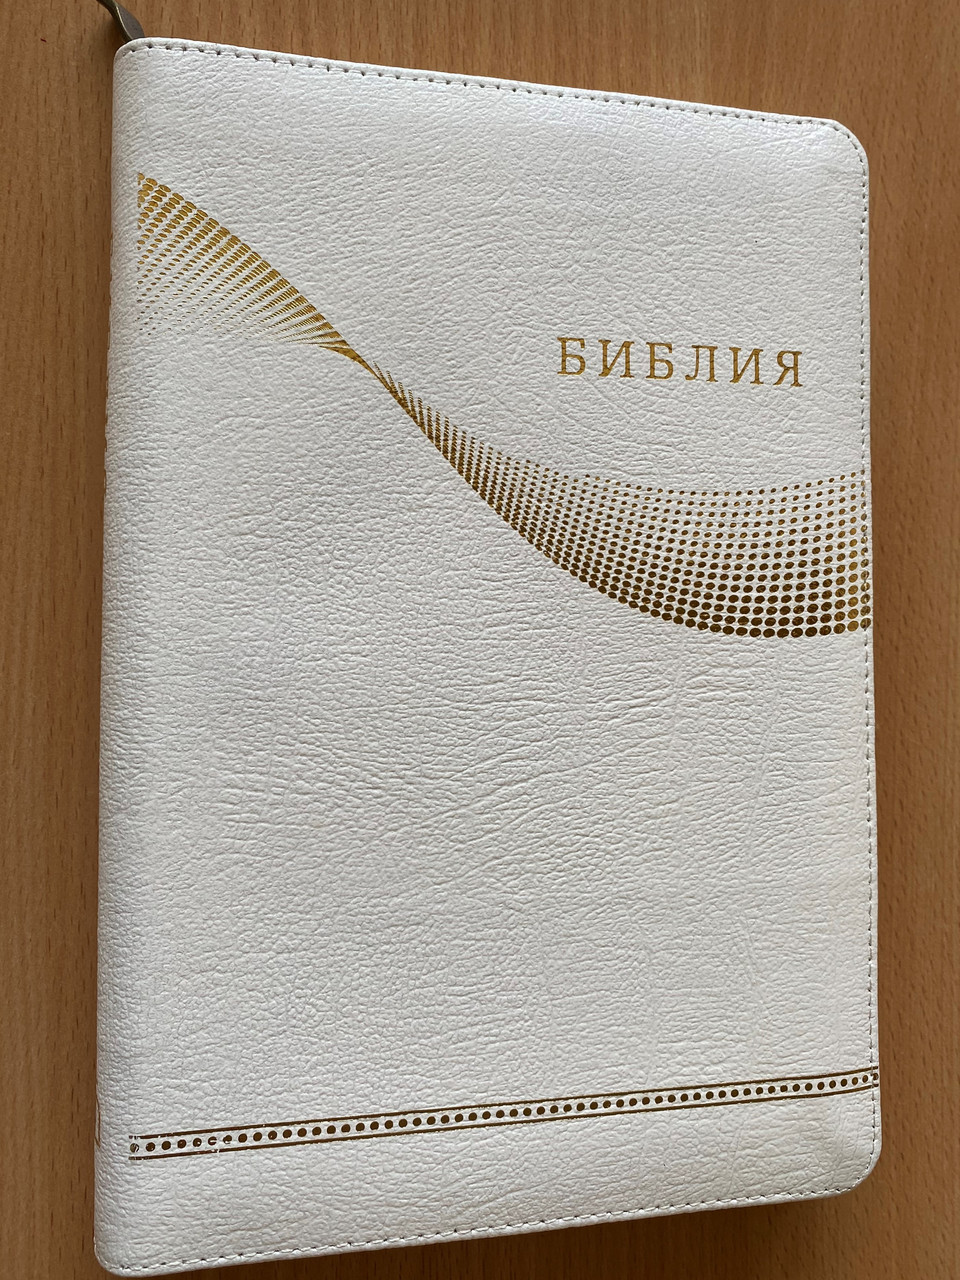 https://cdn10.bigcommerce.com/s-62bdpkt7pb/products/0/images/268939/Russian_Bible_-_The_books_of_the_Holy_Scriptures_of_the_Old_and_New_Testaments_are_canonical._White_Leather_bound_with_zipper_and_golden_edges_Mid_Size_Russian_Bible_Society_2017_1__14826.1678087378.1280.1280.JPG?c=2&_gl=1*zm002r*_ga*MjA2NTIxMjE2MC4xNTkwNTEyNTMy*_ga_WS2VZYPC6G*MTY3ODA3OTA5Mi43OTAuMS4xNjc4MDg2ODQxLjYwLjAuMA..